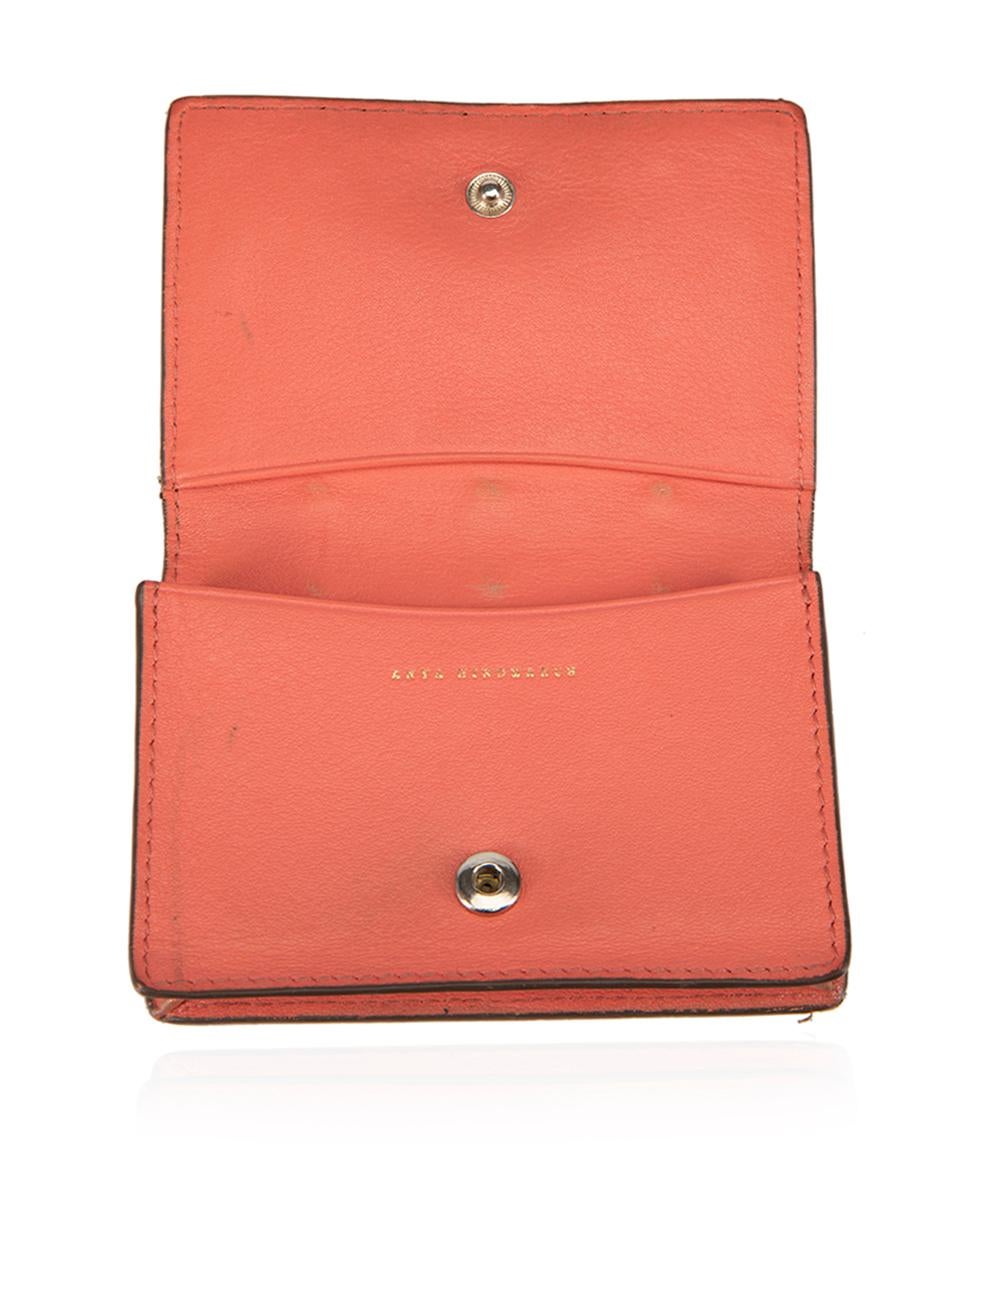 Anya Hindmarch Women's Coral Leather Joss Heart Studded Card Case For Sale 2